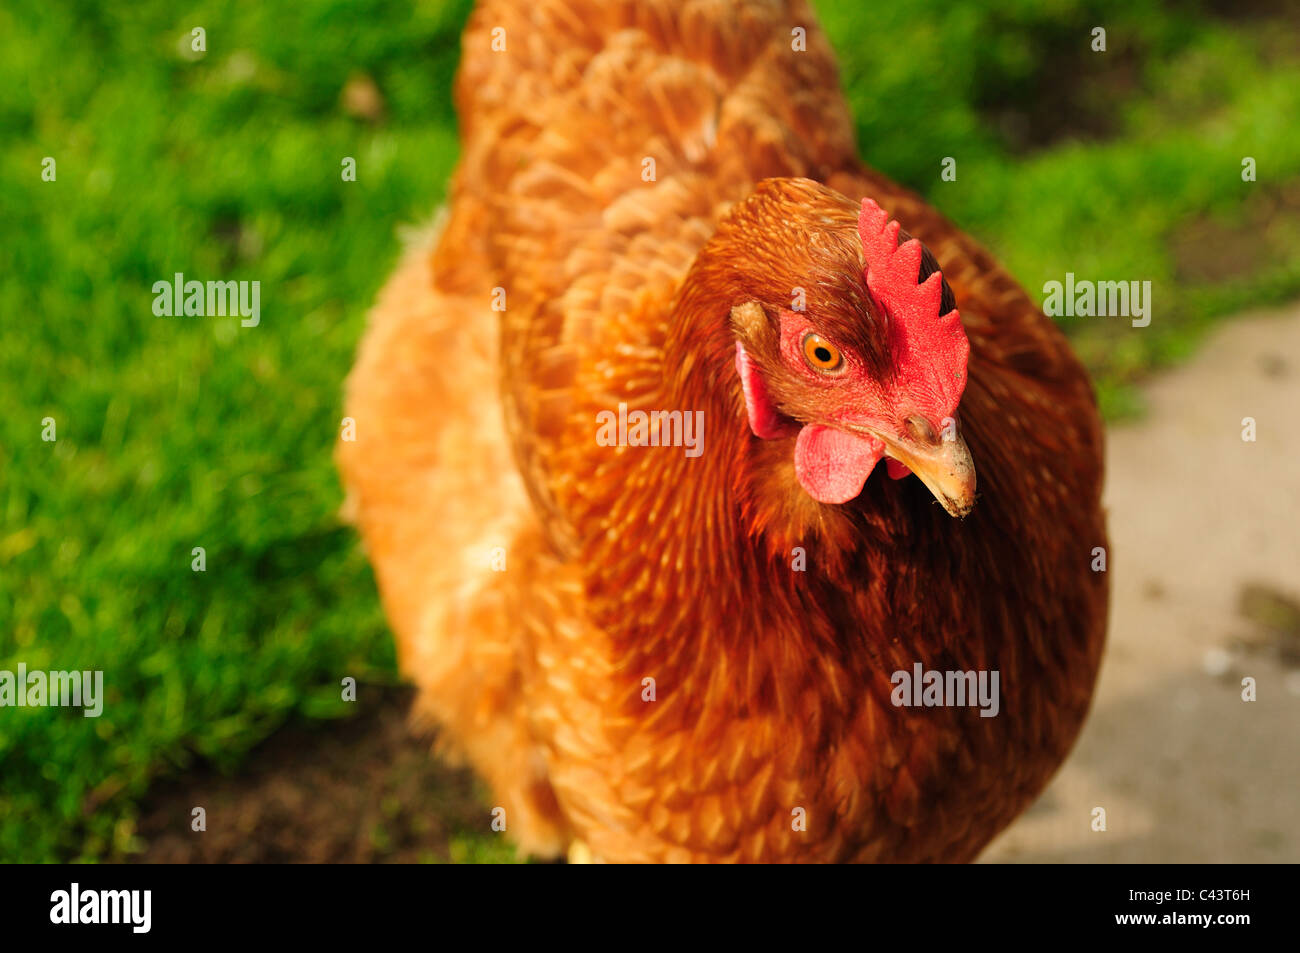 Hens Chicken's Poultry.(Gallus gallus domesticus). Stock Photo